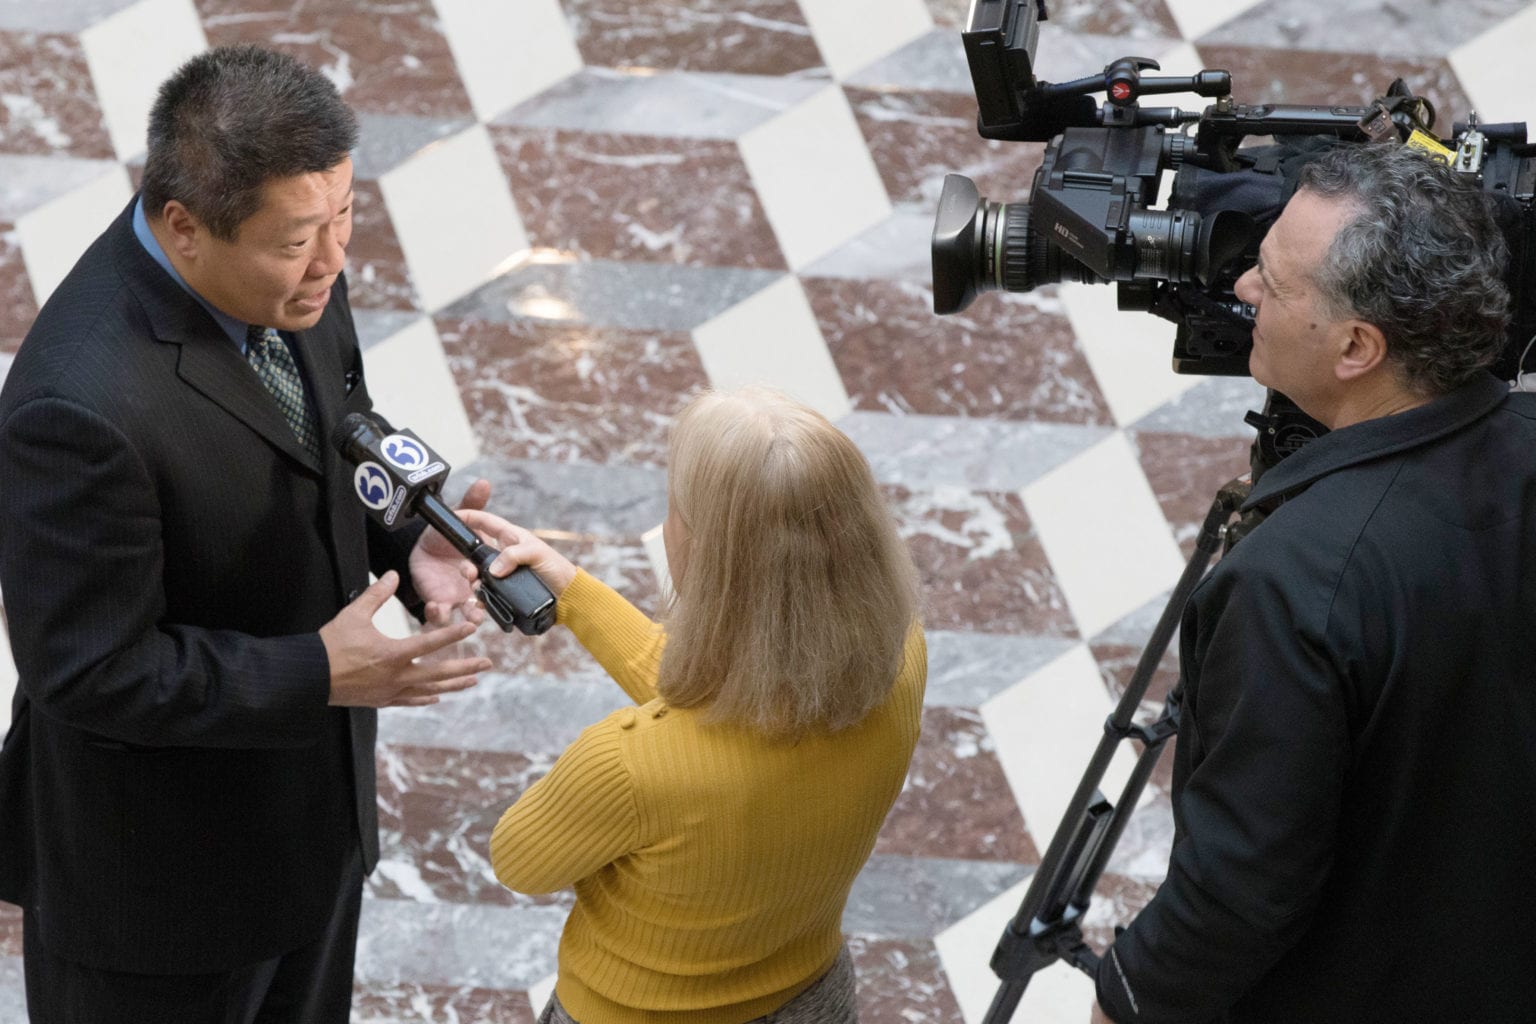 State Senator Tony Hwang talks to reporters following the announcement of a possible third tribal casino in East Windsor, CT. Hartford, CT 2-27-2017.